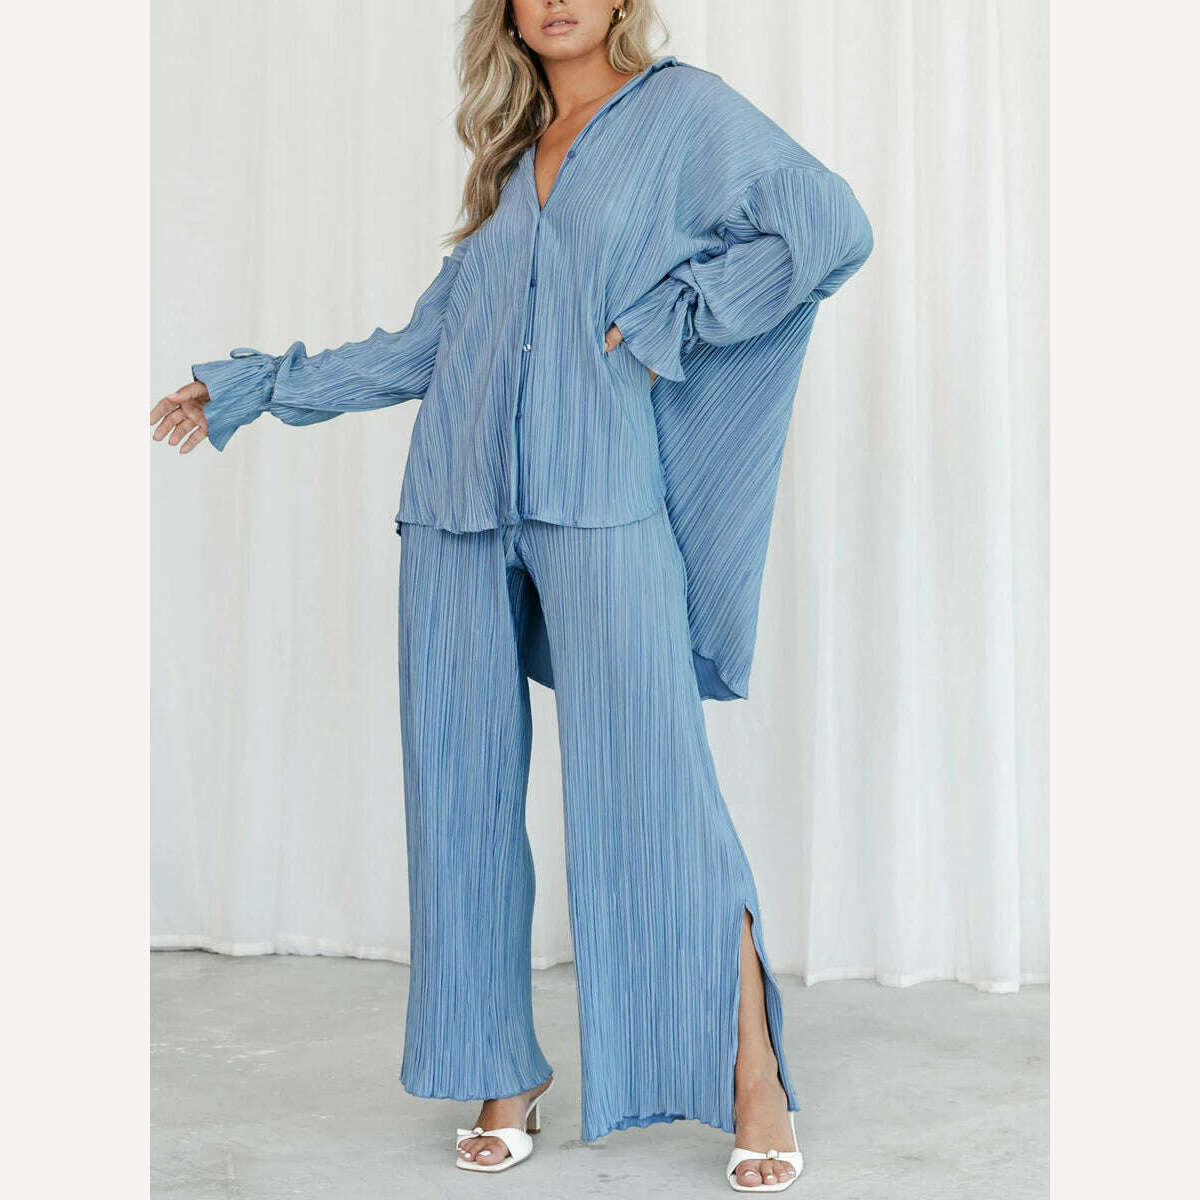 KIMLUD, wsevypo Women Two-piece Pleated Pants Suits Casual Chic Solid Color Long Sleeve Button down Shirts and Straight Leg Trousers Set, KIMLUD Womens Clothes